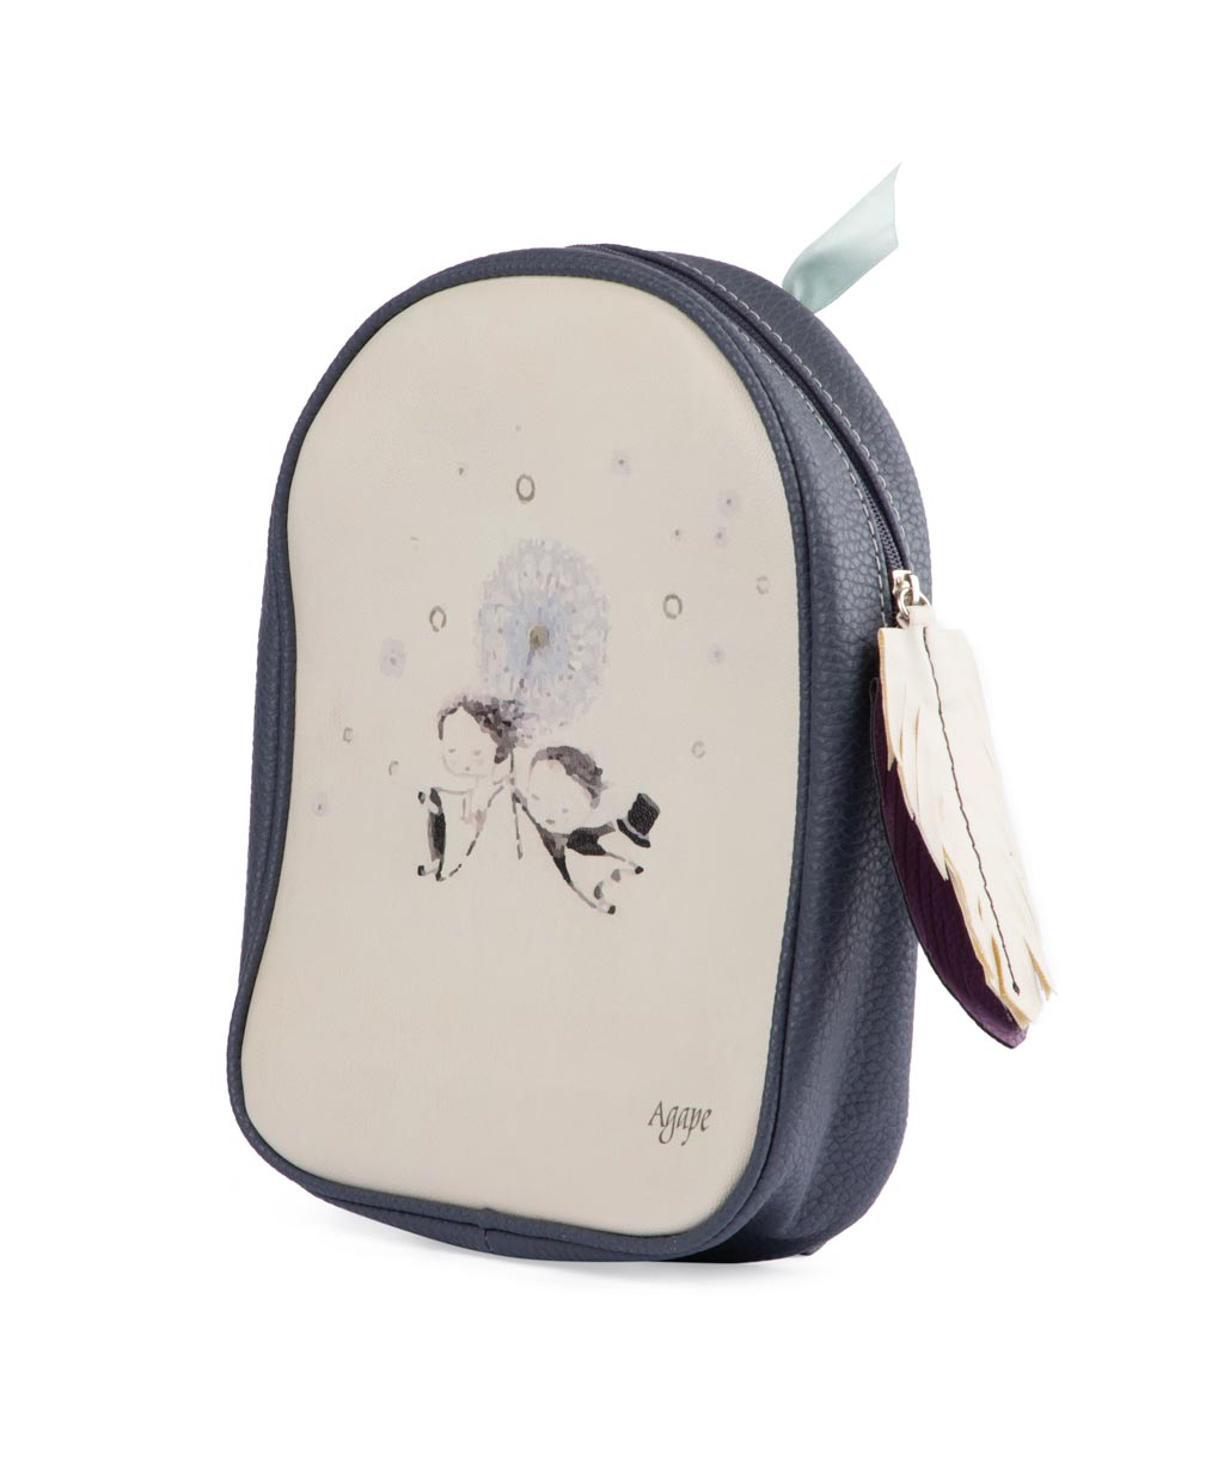 Bag `Agape bags` with a notebook